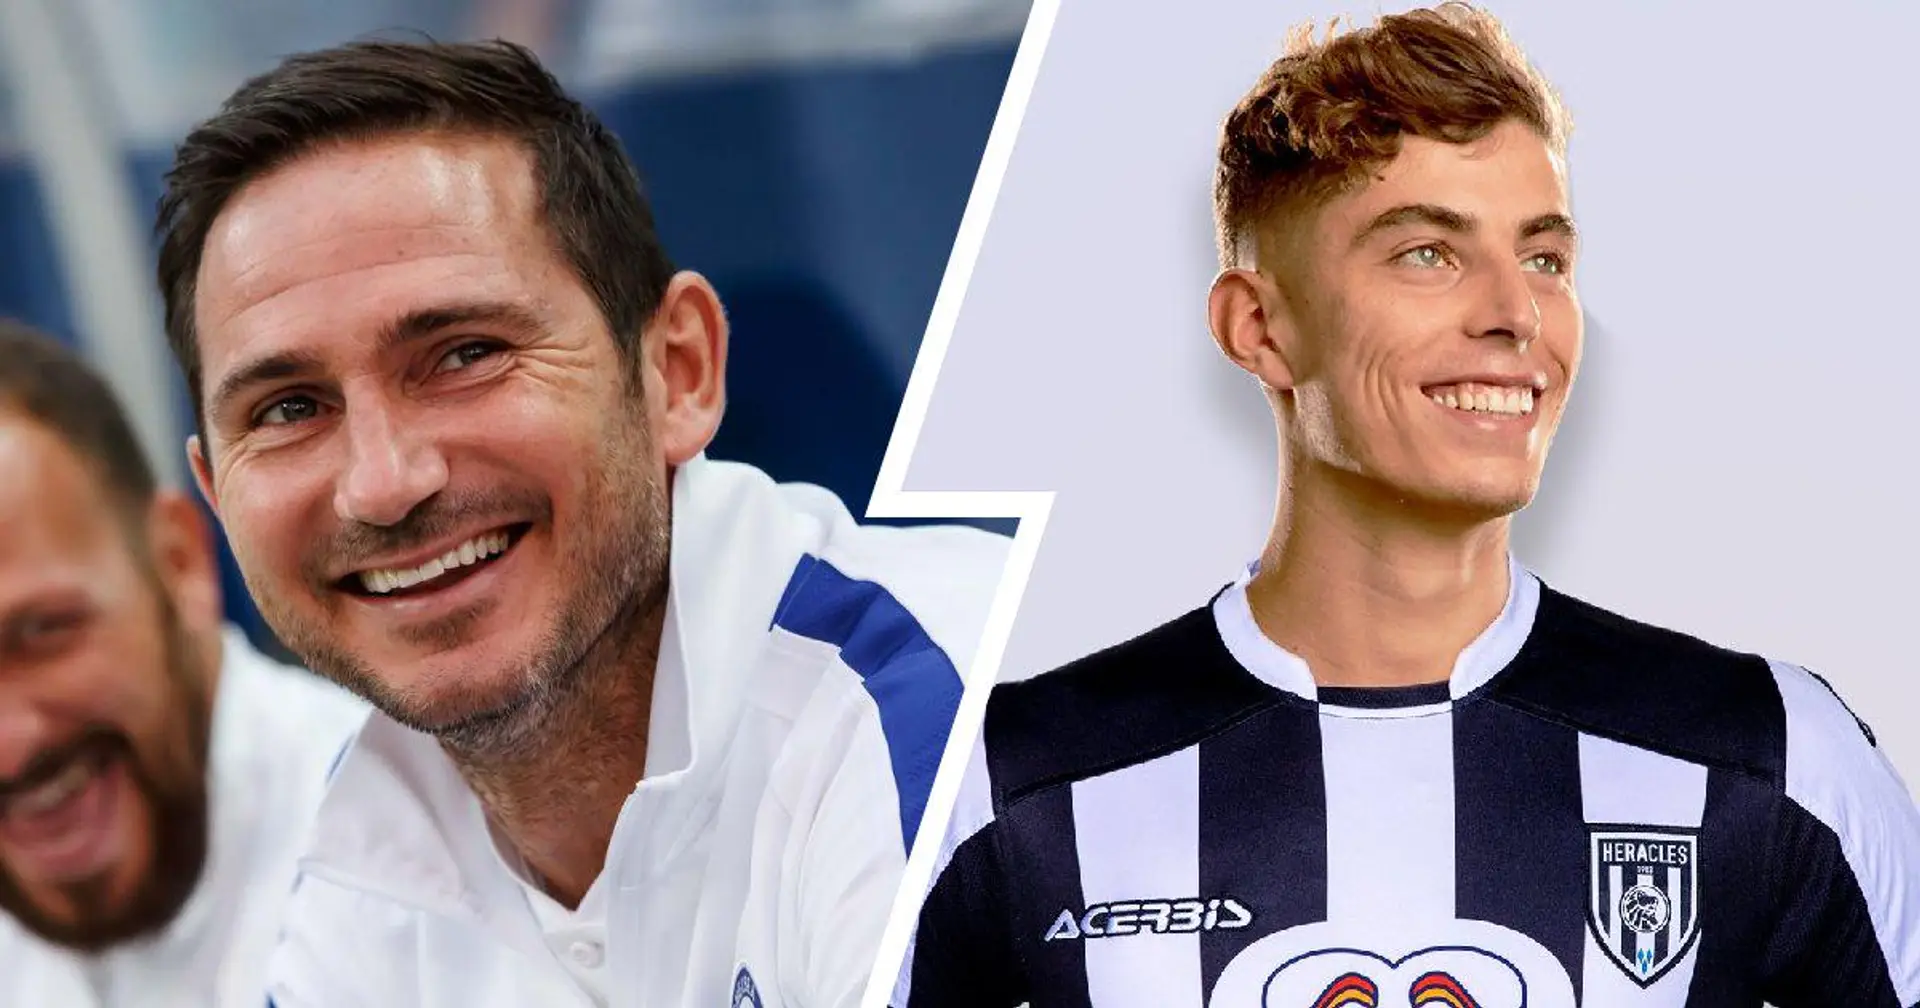 Dutch club Heracles Almelo troll Chelsea by ‘announcing’ Kai Havertz signing